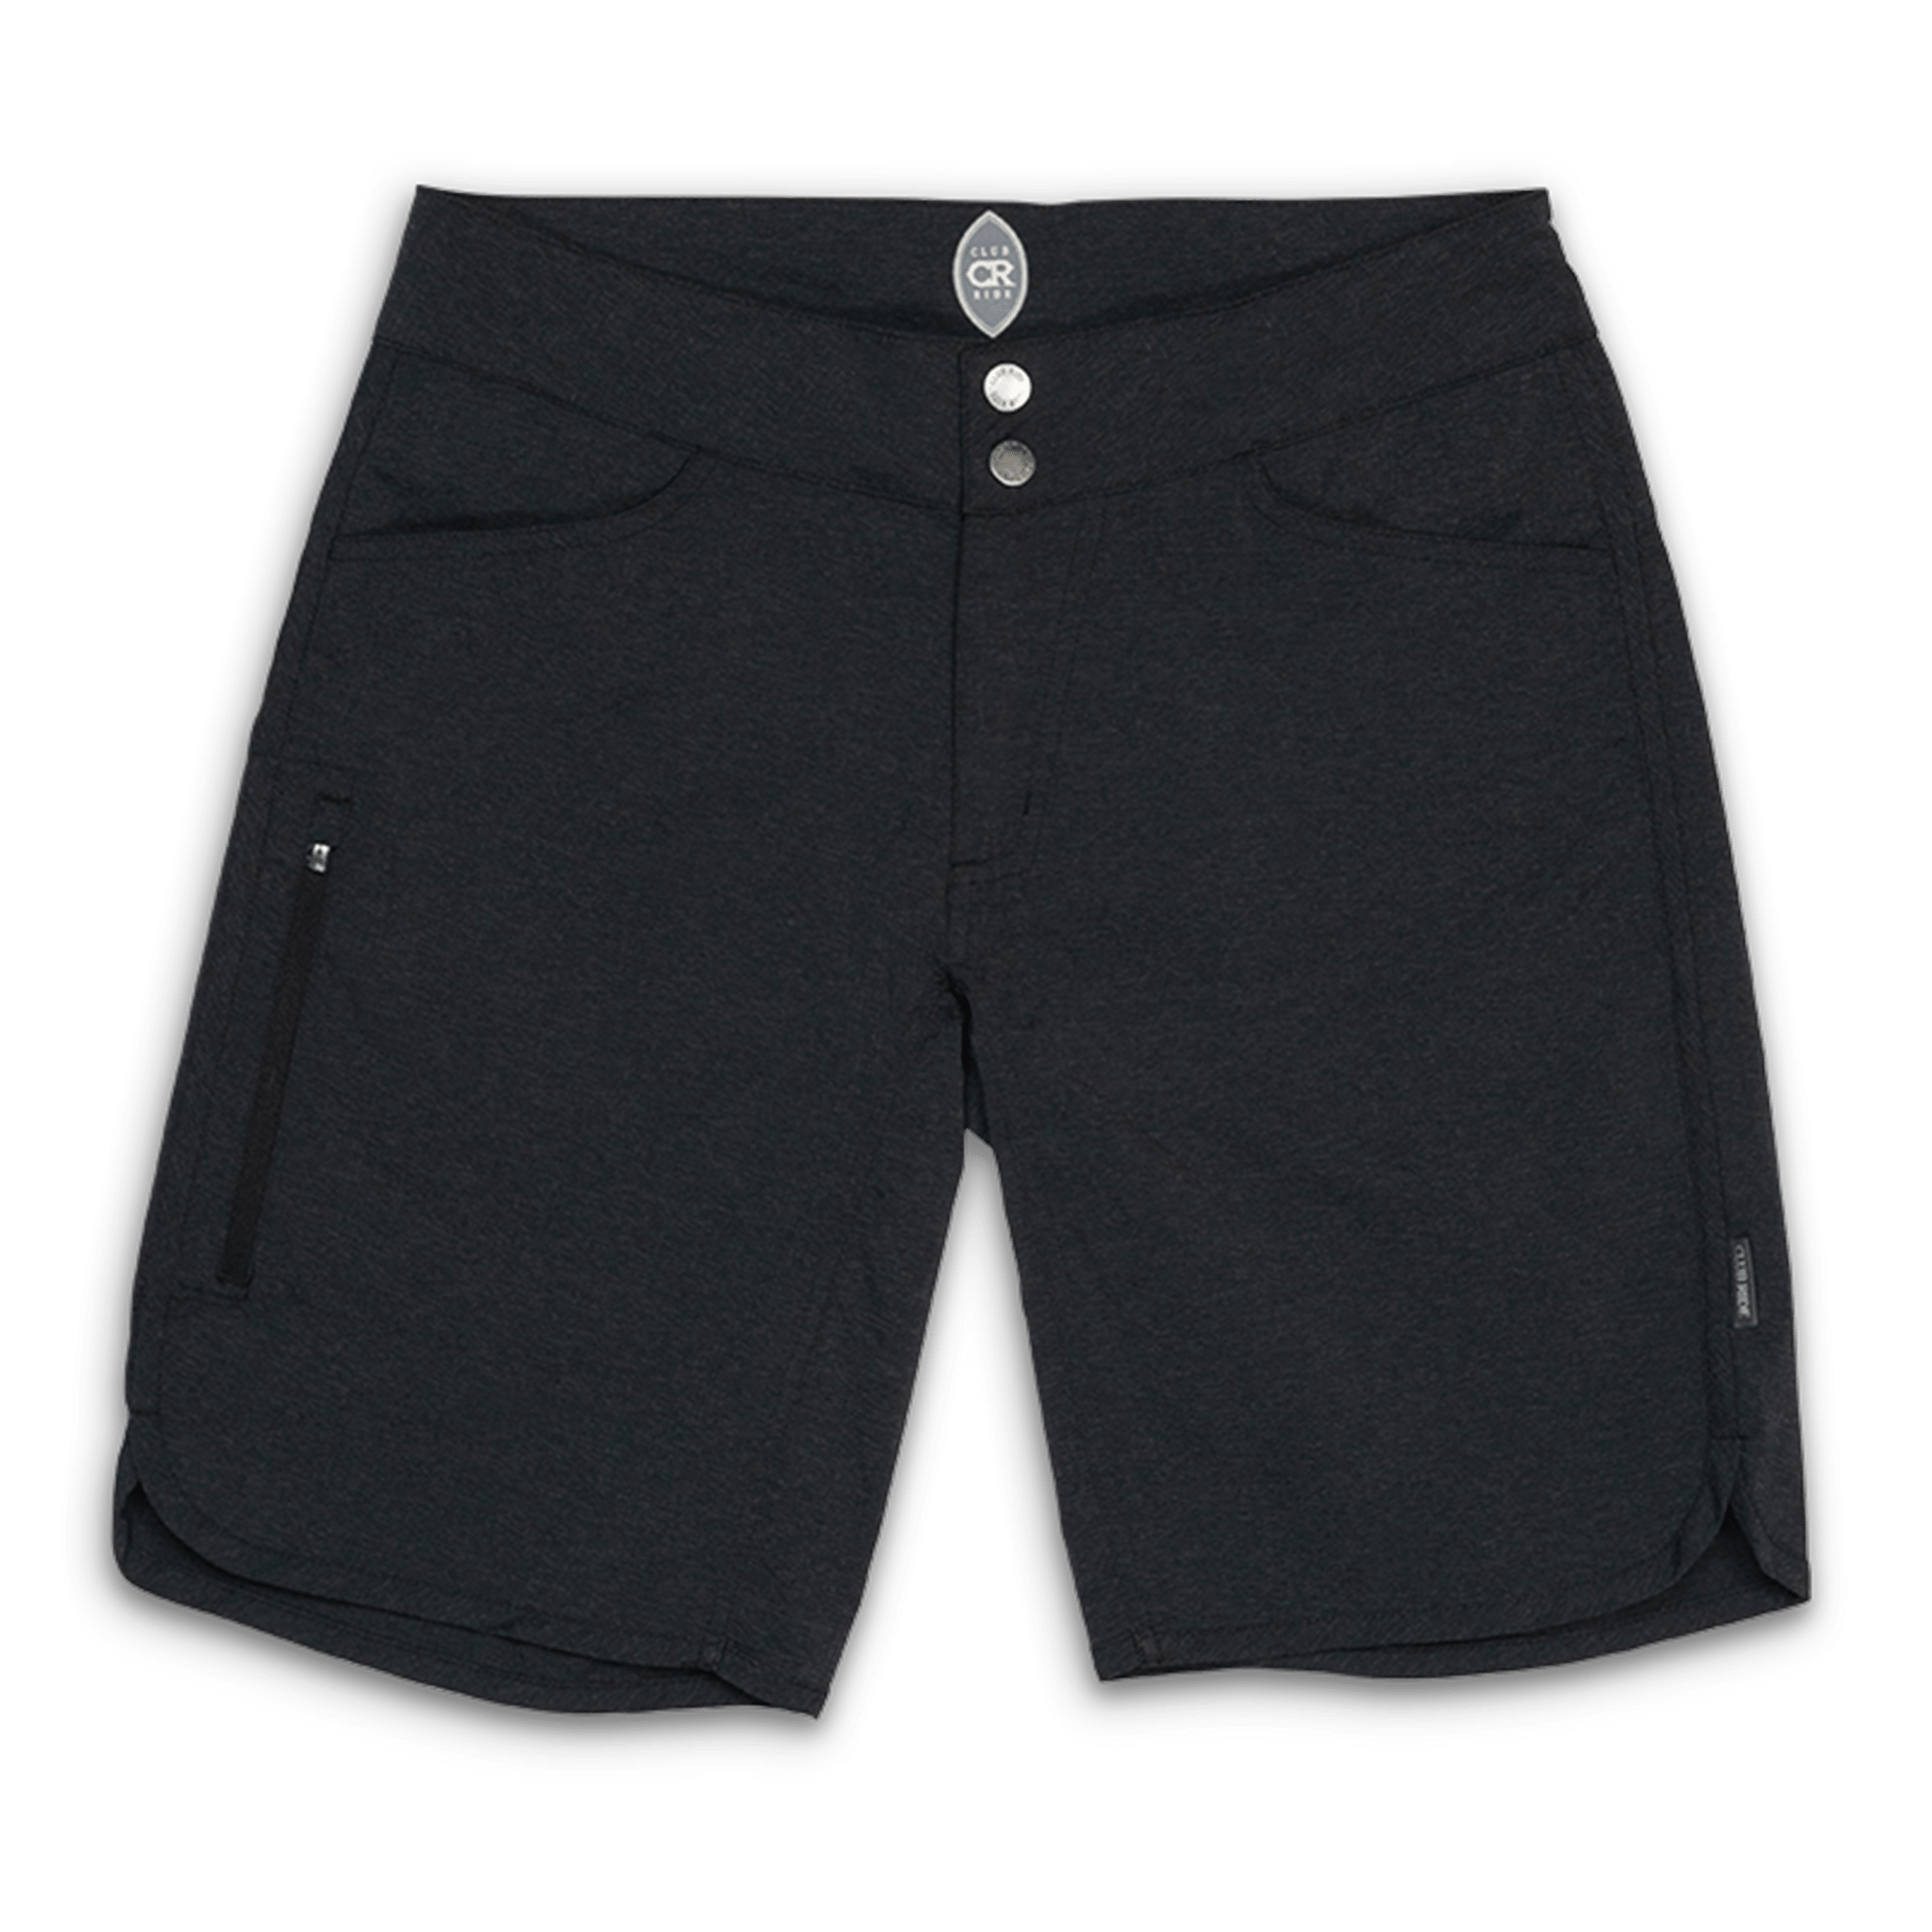 Women's Savvy Surf the Trail Shorts 9"